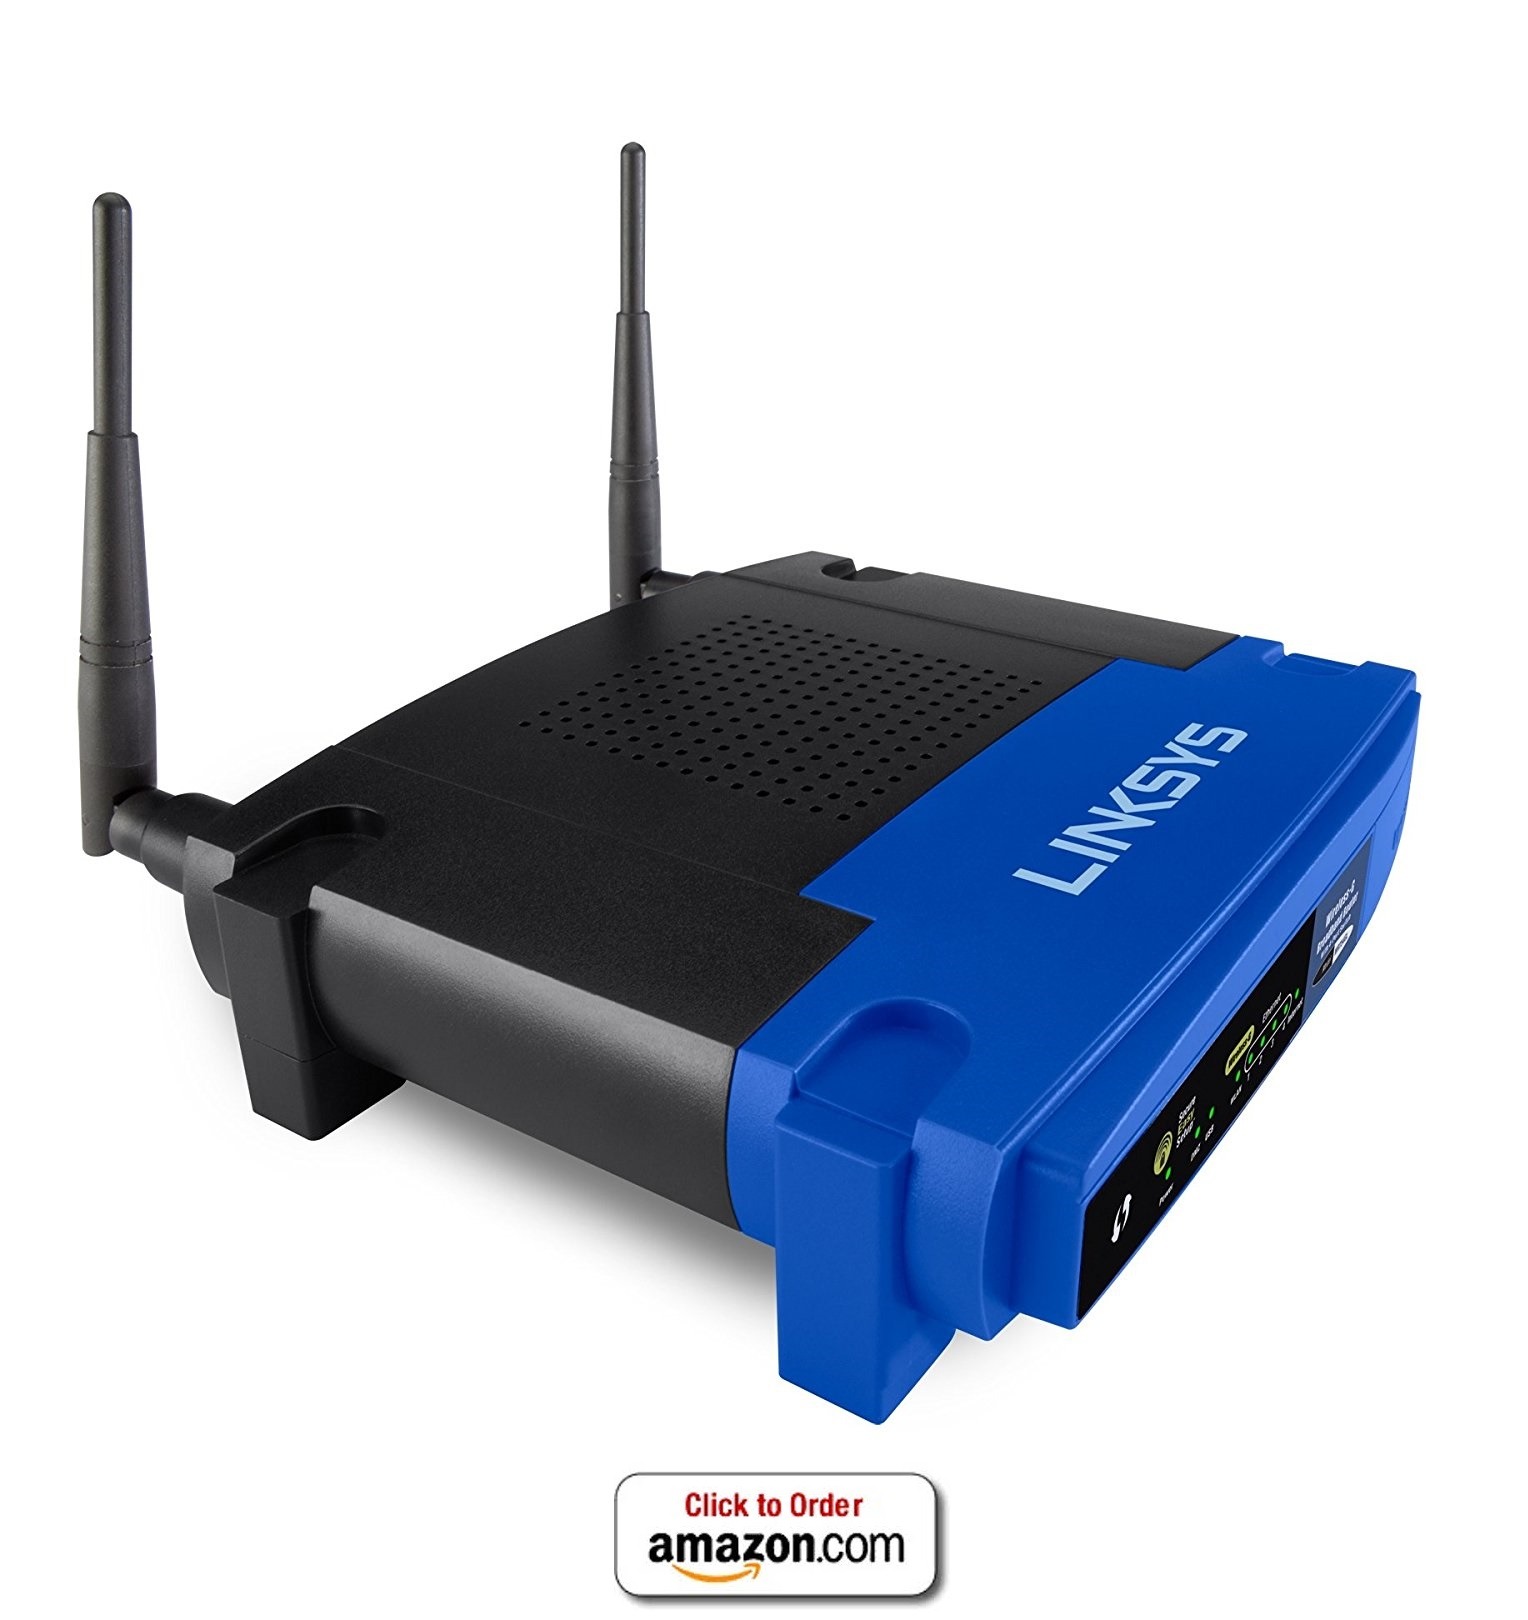 linksys wifi router under $100 dollar